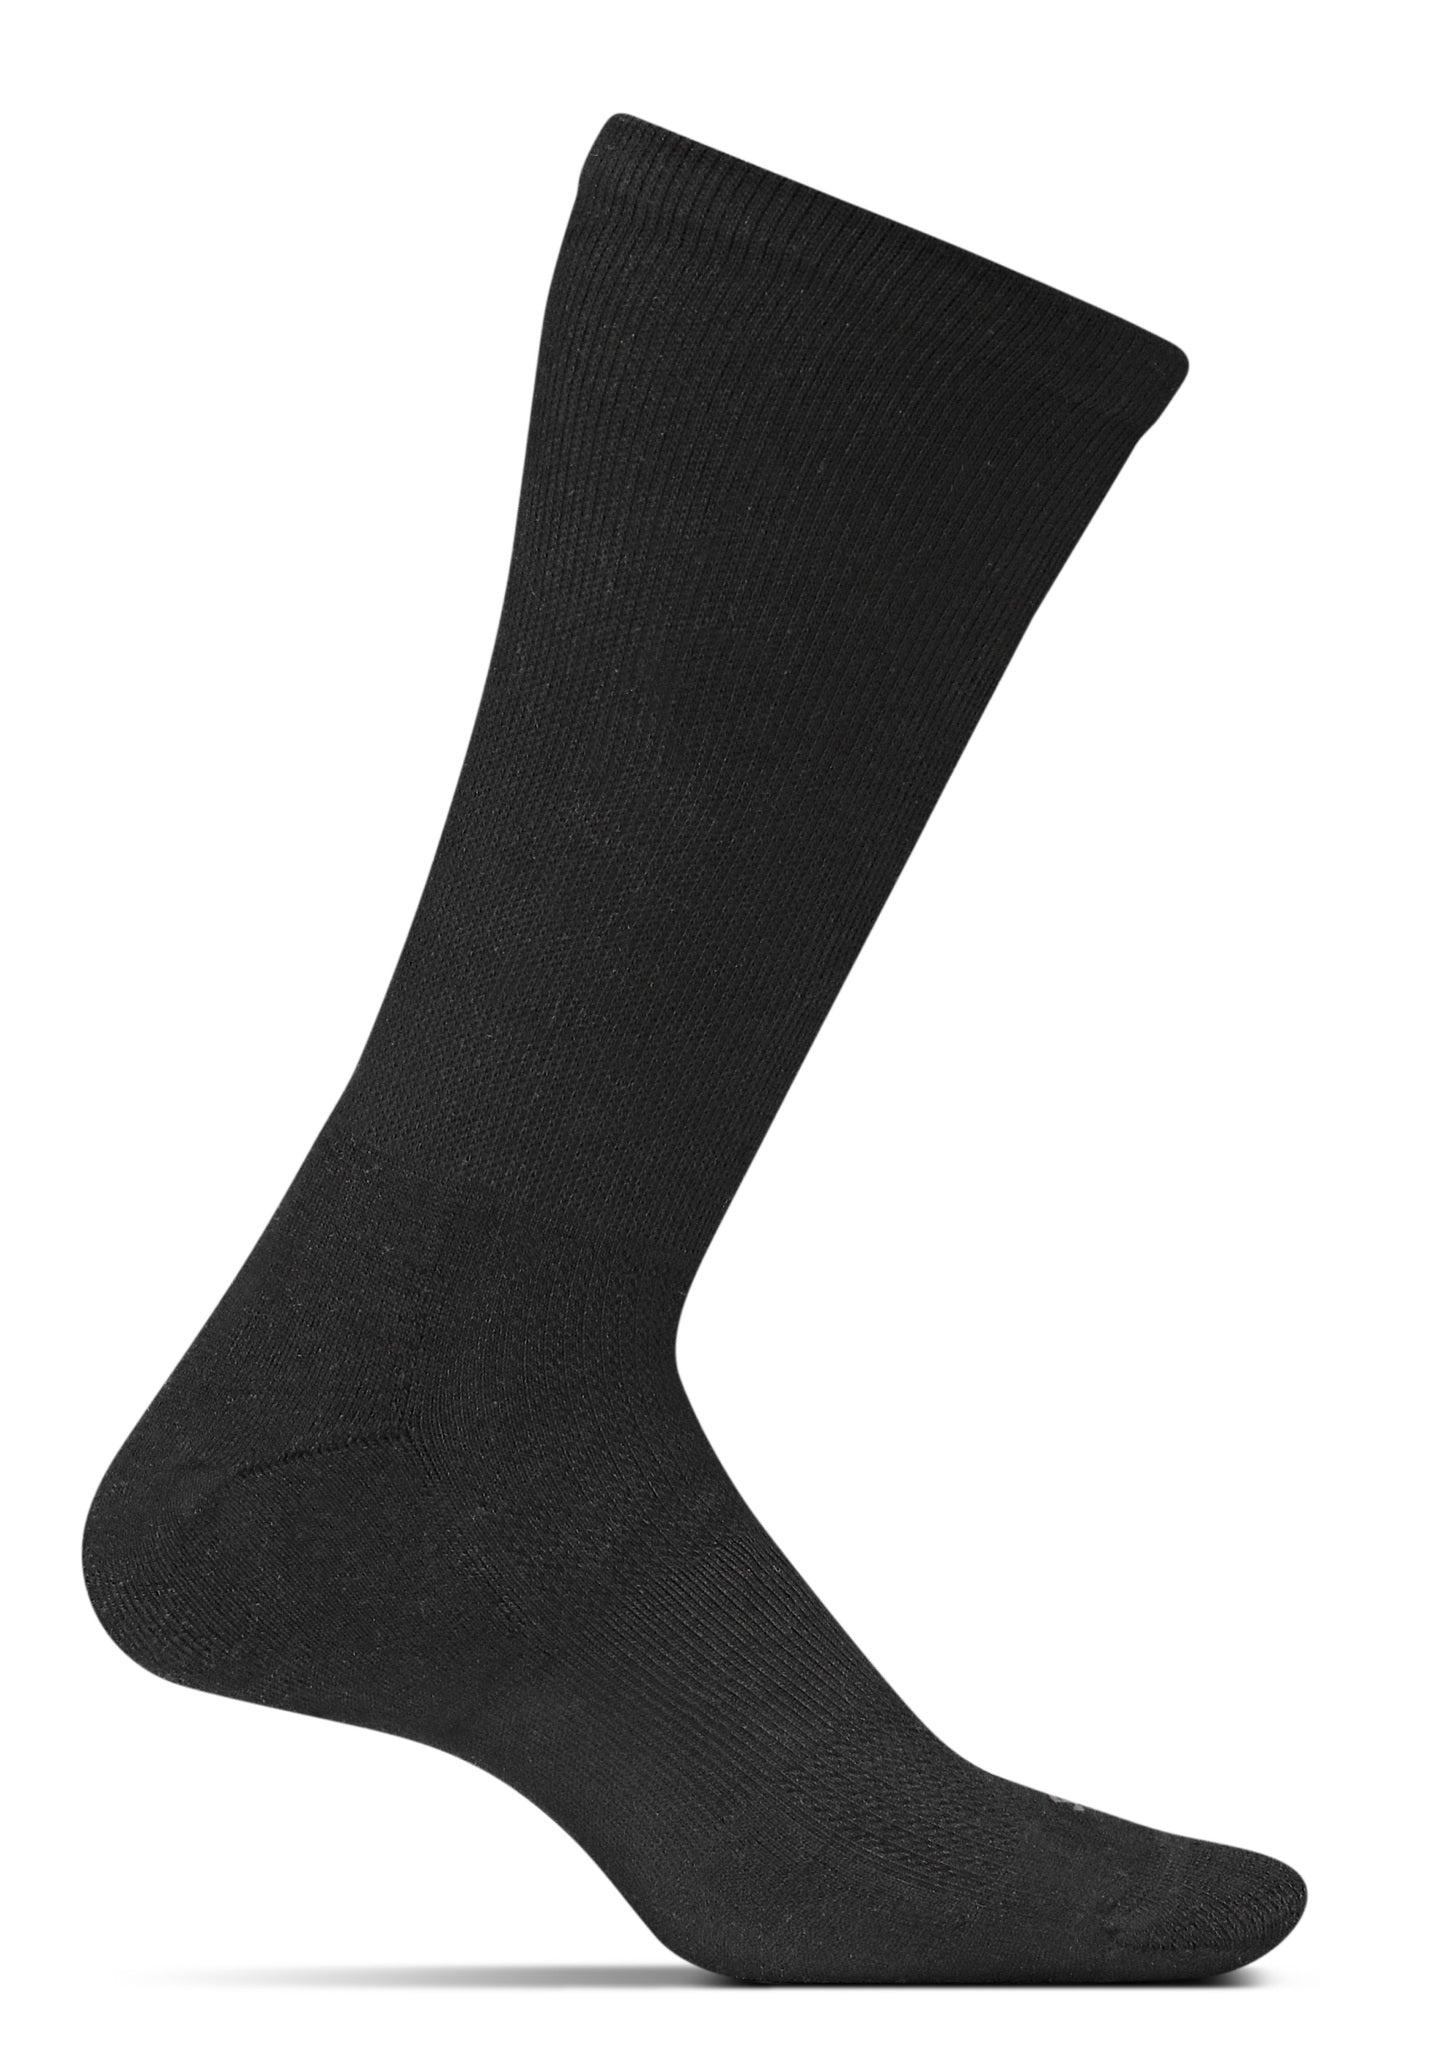 Medial view of the Feetures Diabetic Crew sock in the color black